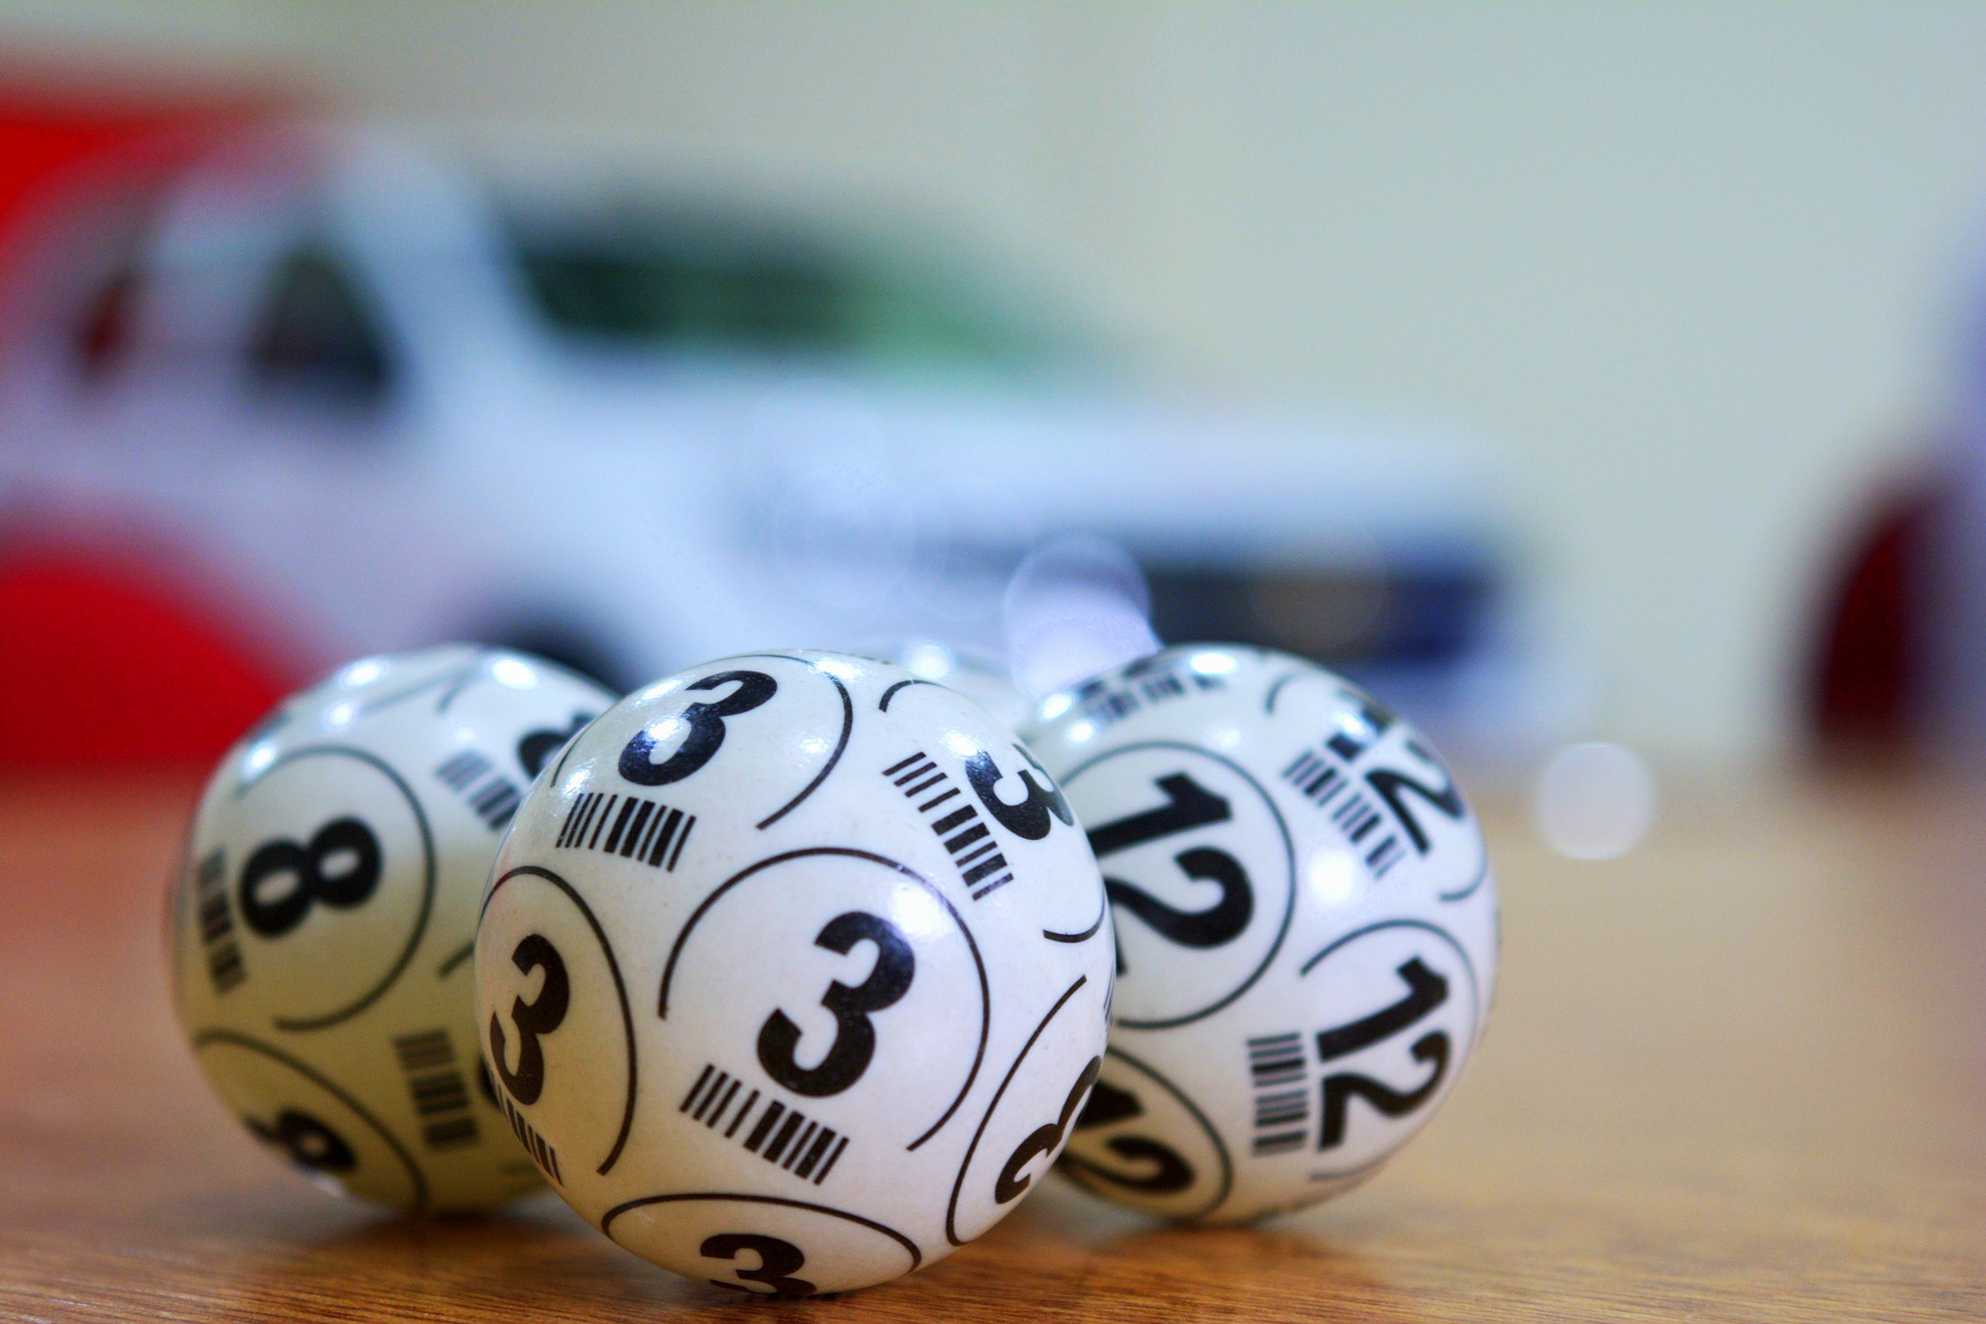 Several lottery balls on a table